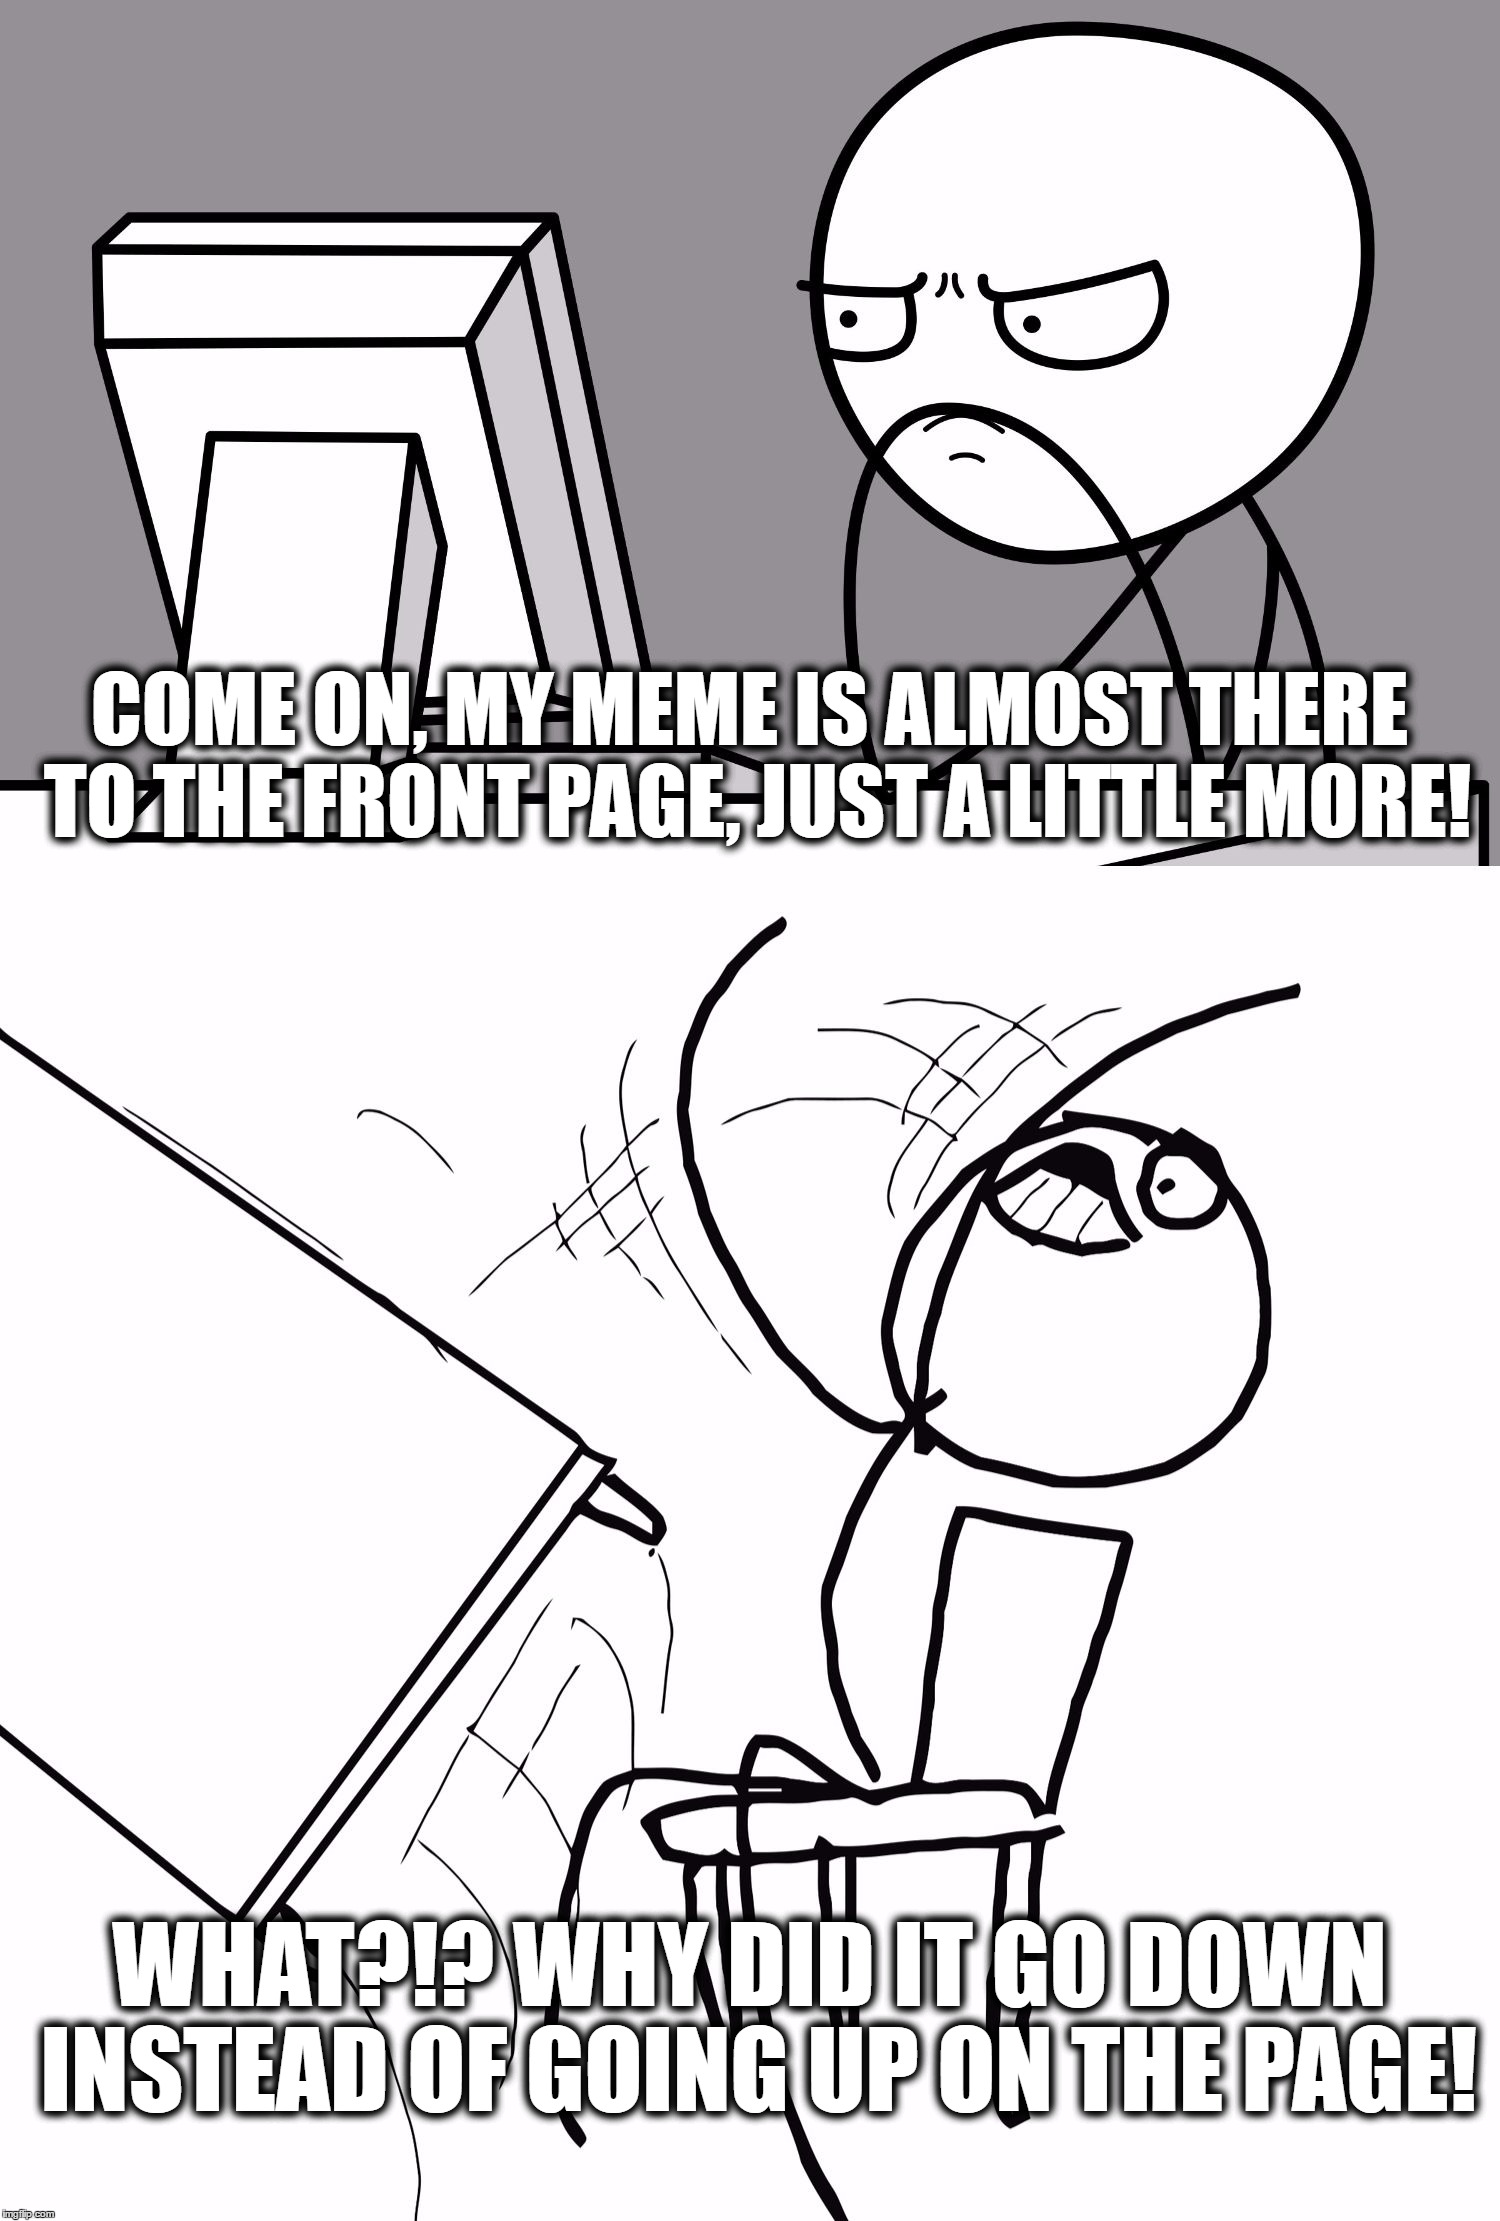 Please Comment Any Of Your 2nd or 3rd Page Memes That Never Saw The Light Of The Front Page. | COME ON, MY MEME IS ALMOST THERE TO THE FRONT PAGE, JUST A LITTLE MORE! WHAT?!? WHY DID IT GO DOWN INSTEAD OF GOING UP ON THE PAGE! | image tagged in computer guy and table flip guy,memes,the struggle is real,2nd page,3rd page,front page | made w/ Imgflip meme maker